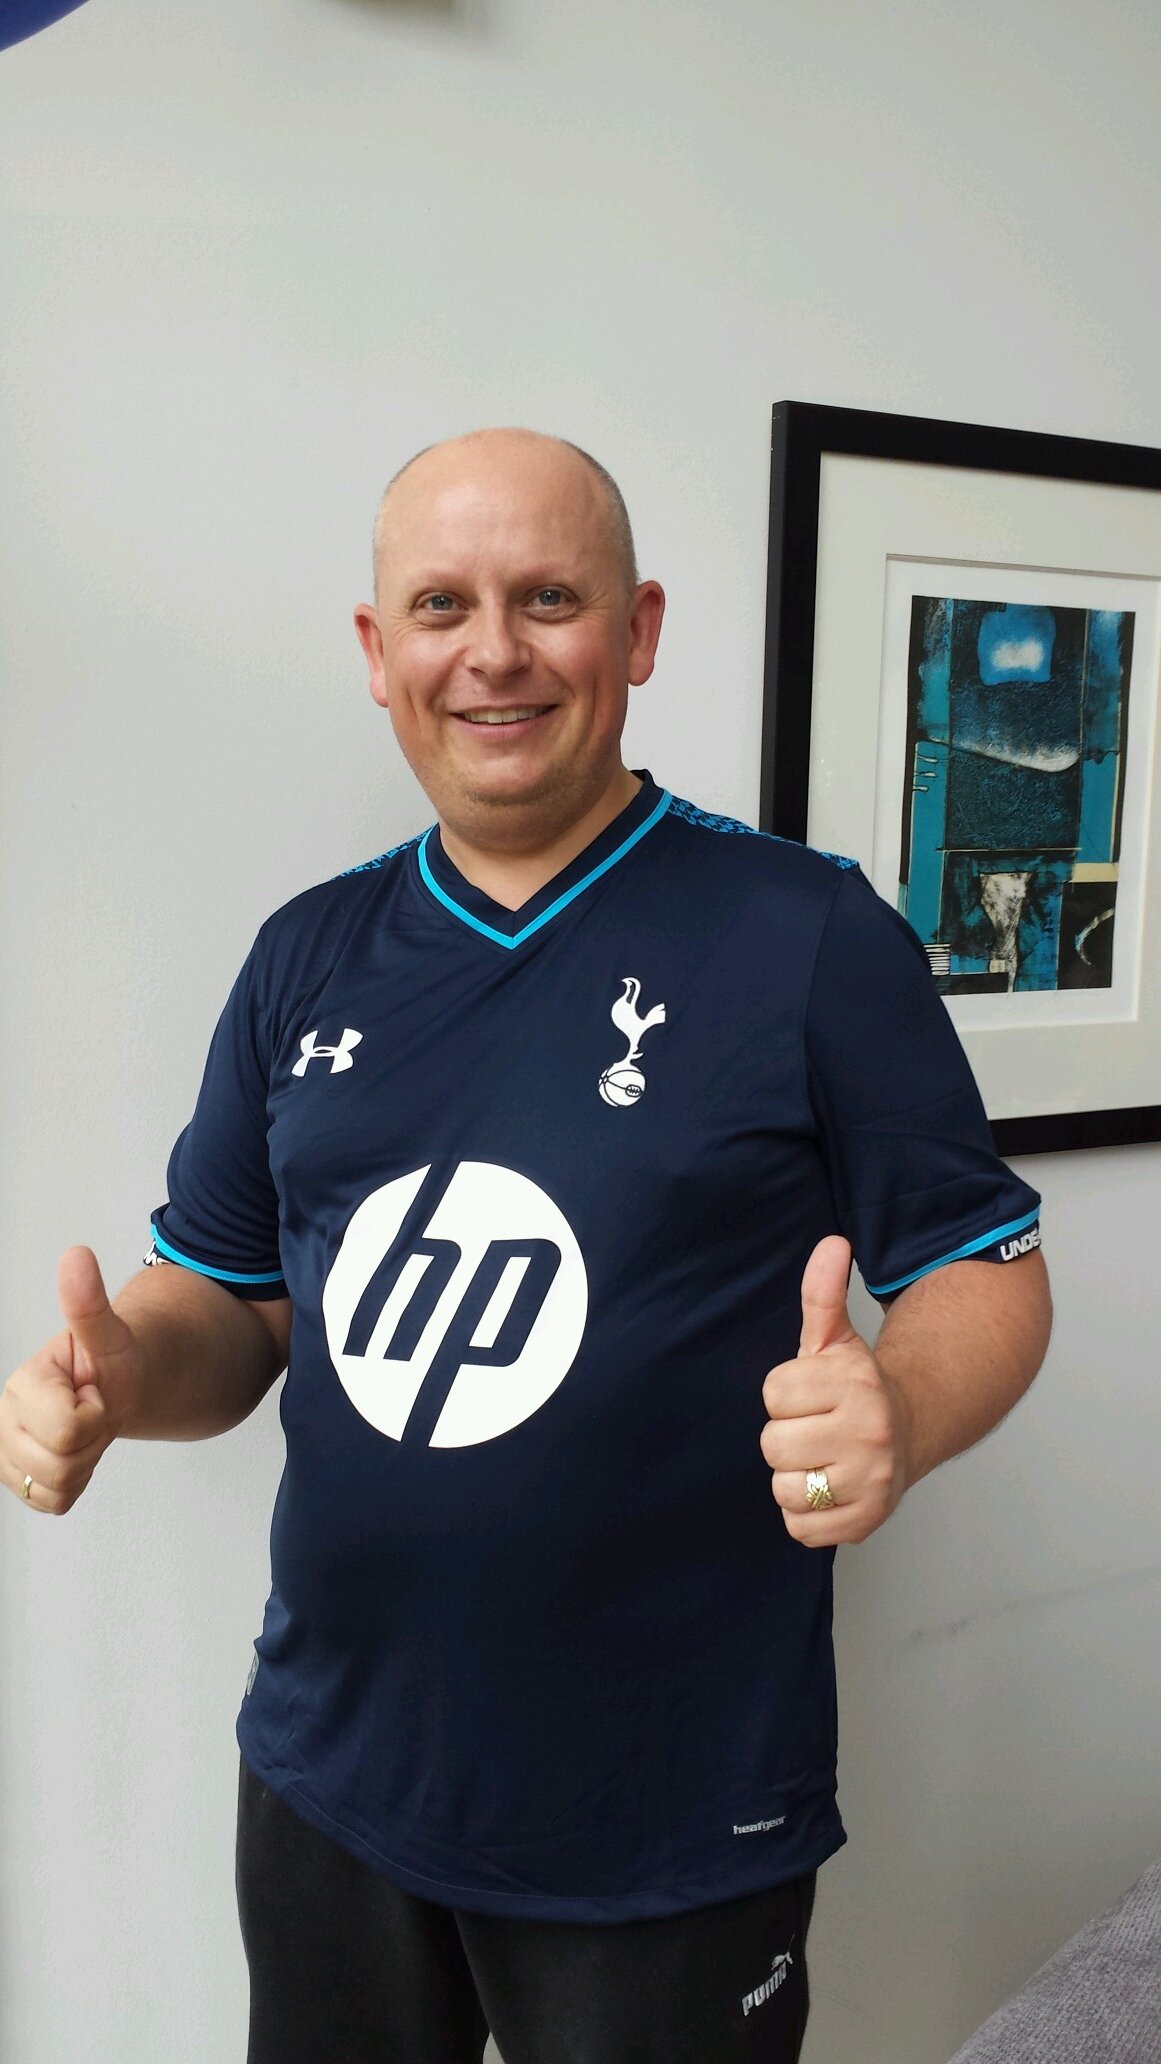 Senior SAP Netweaver Technology Consultant and Spurs supporter.
Come On You Spurs!!!!!